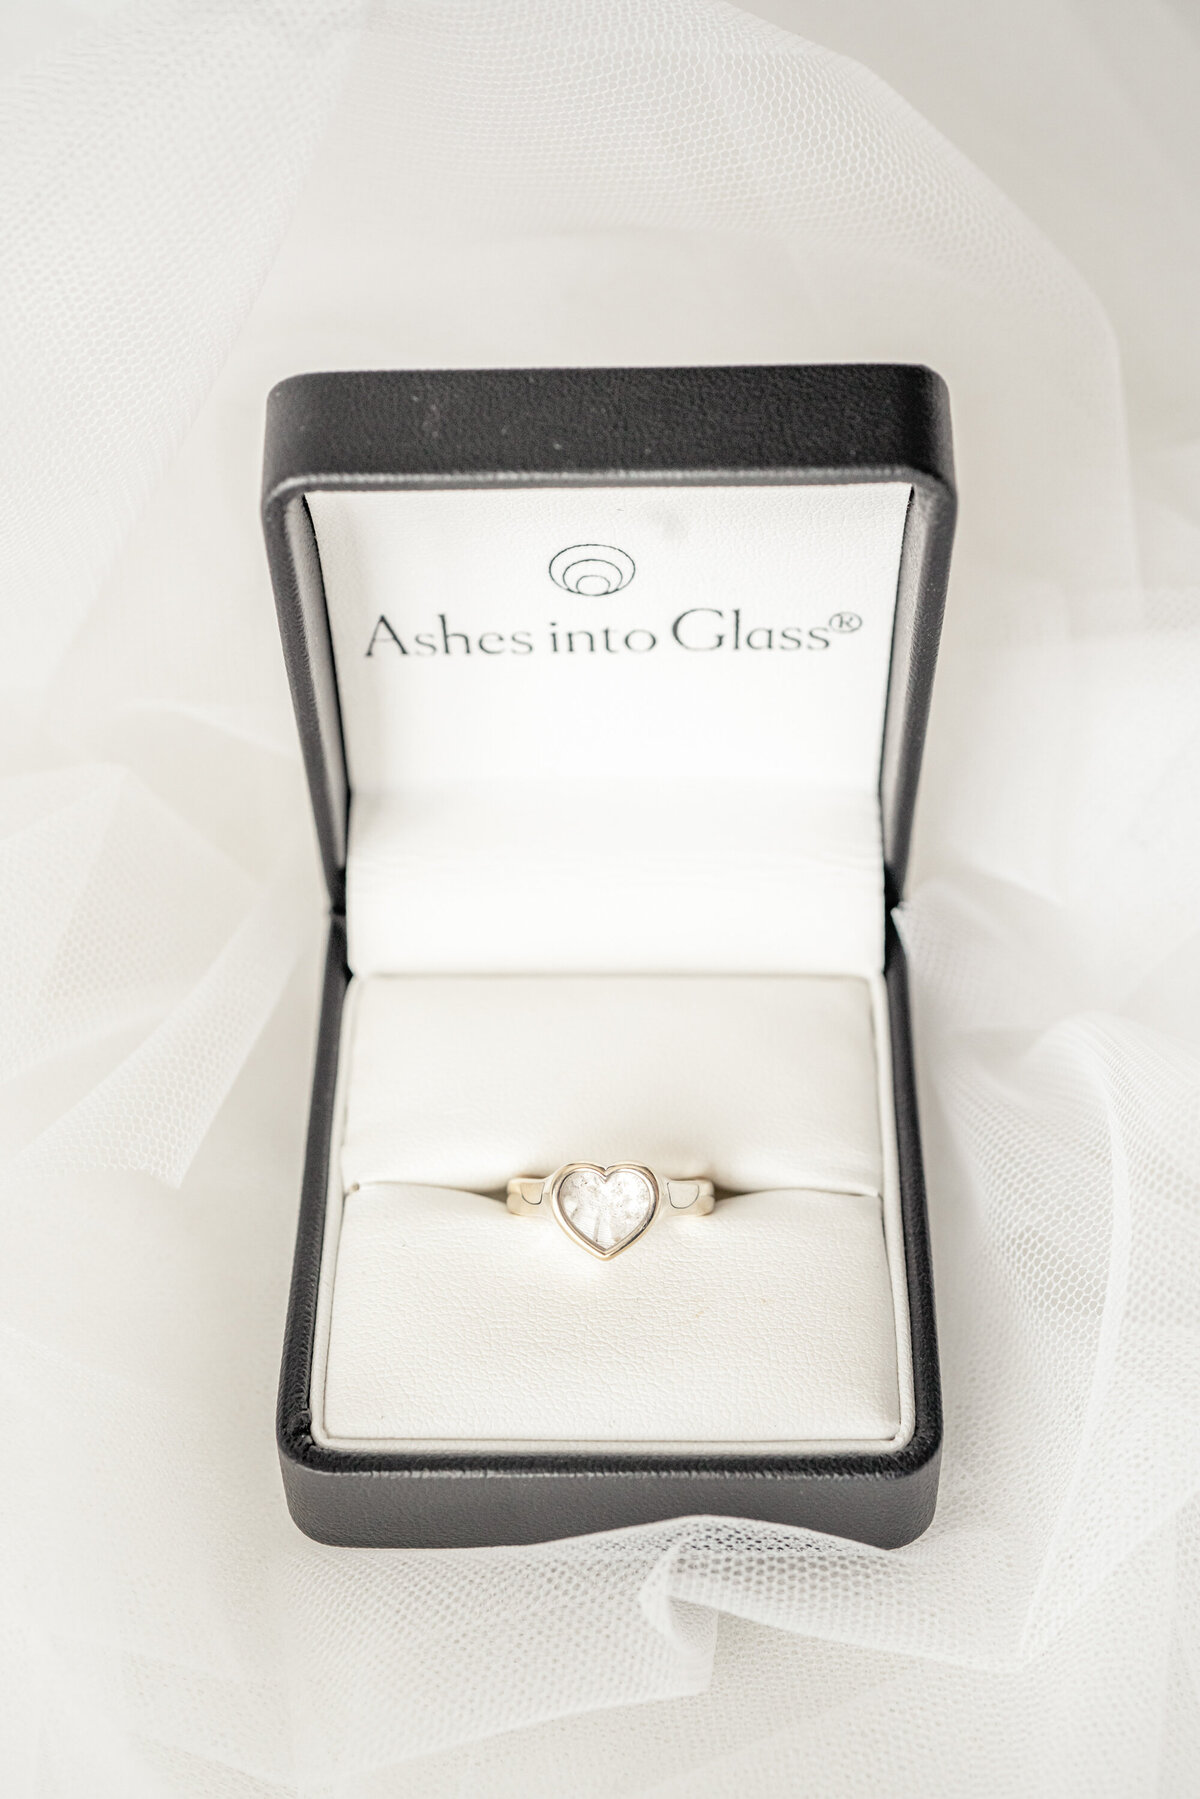 Remembering-loved-ones-at-weddings-ashesinto-glass-ring